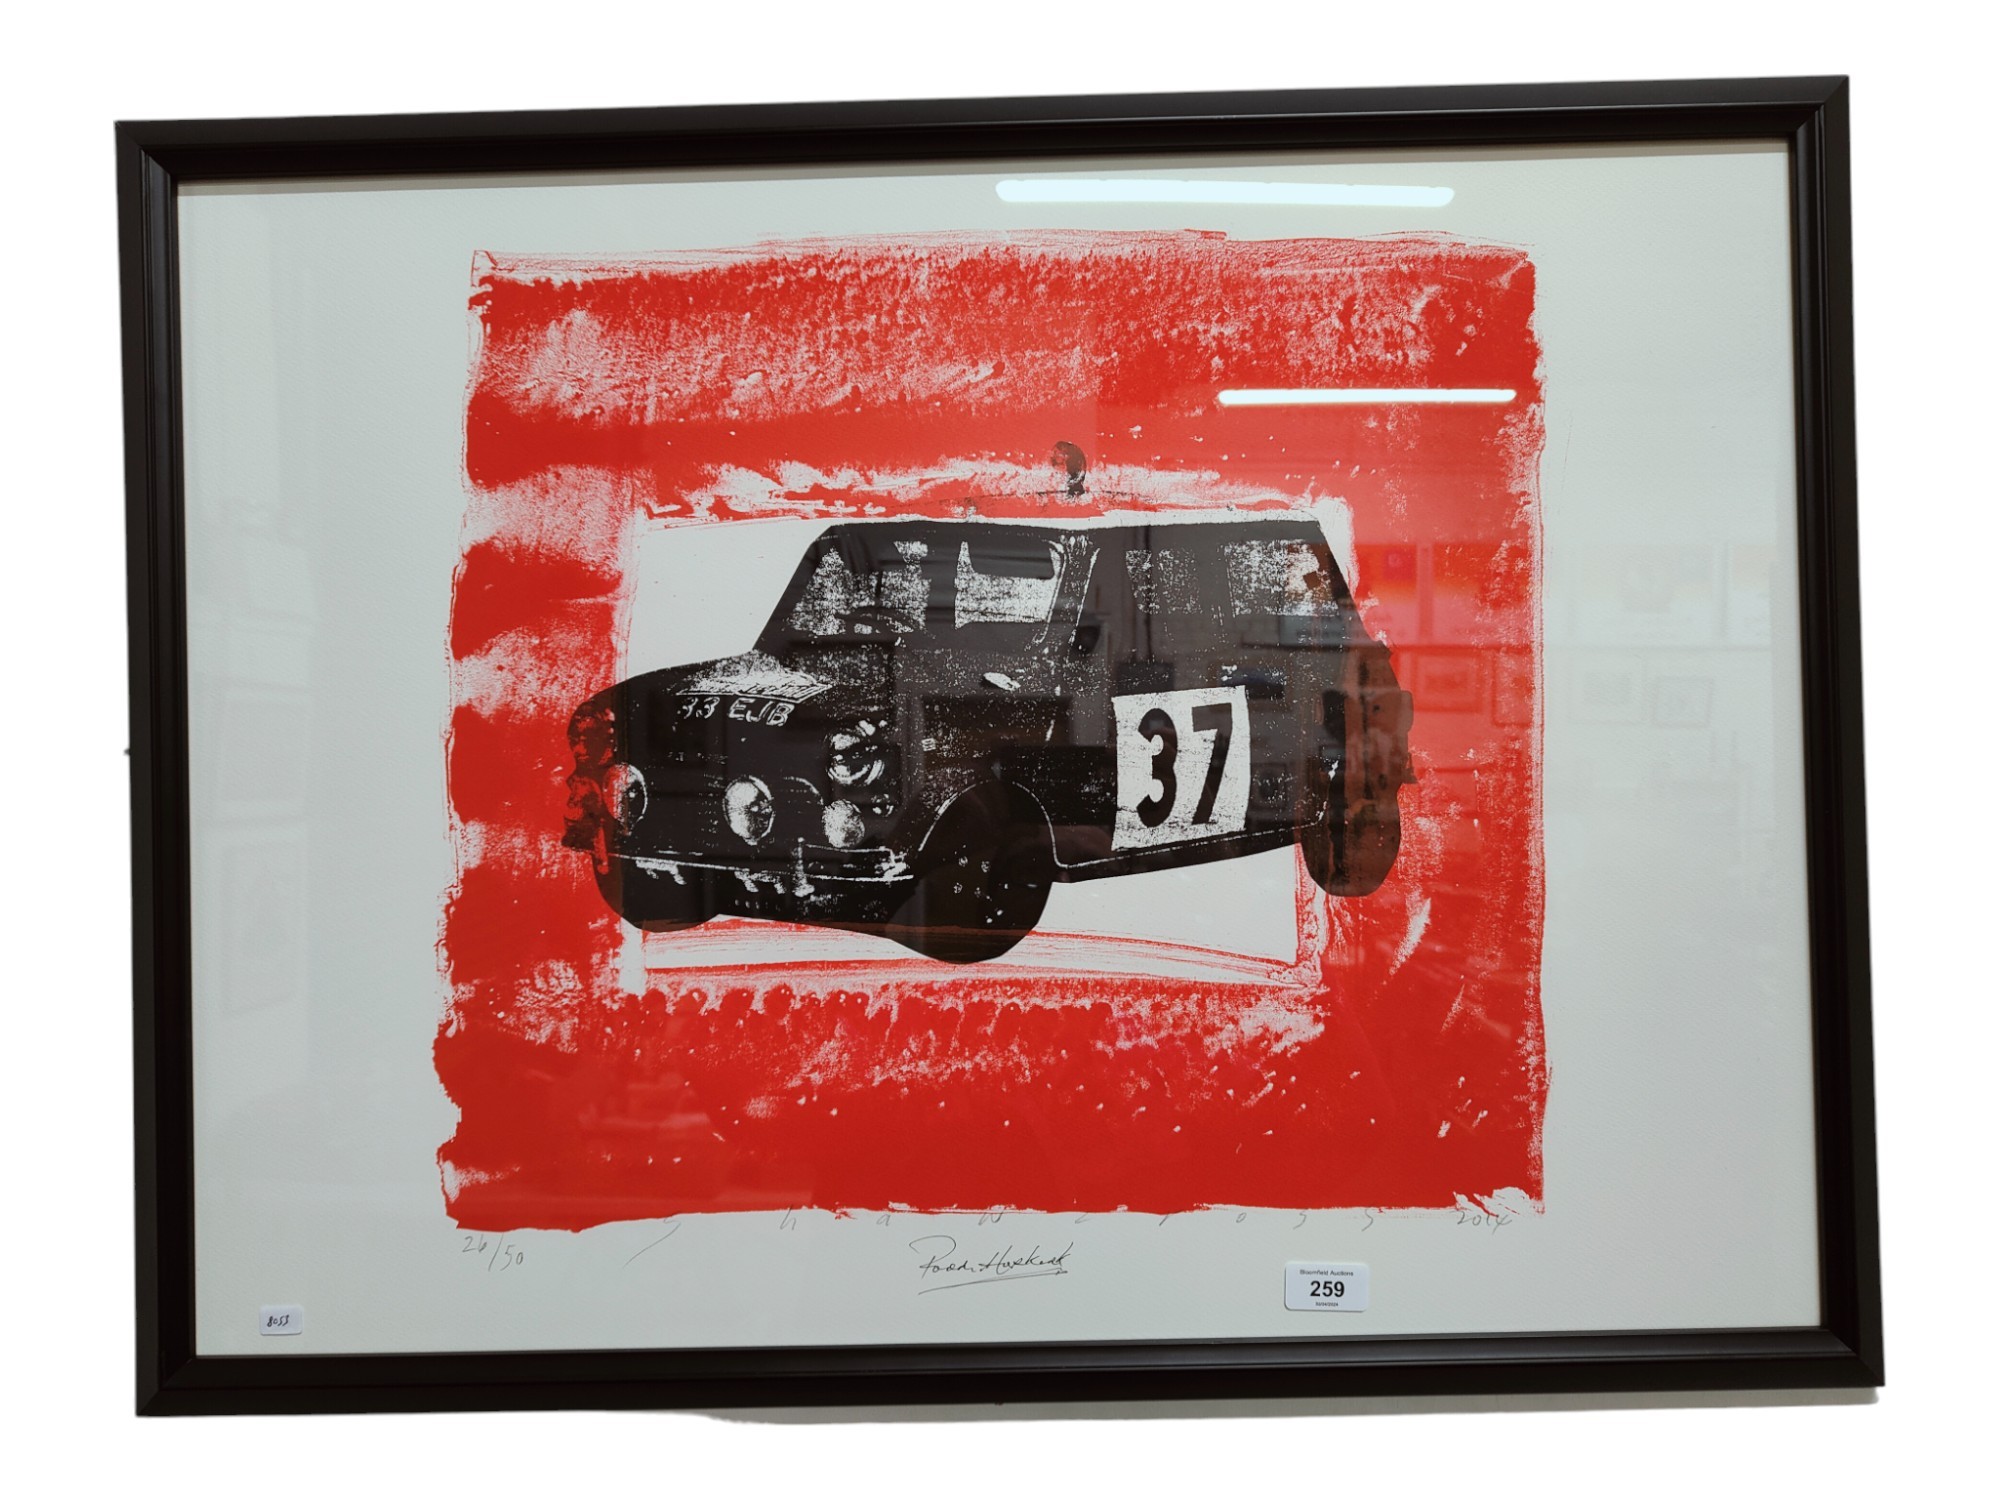 NEIL SHAWCROSS LIMITED EDITION LITOGRAPH SIGNED BY ARTIST & PADDY HOPKIRK